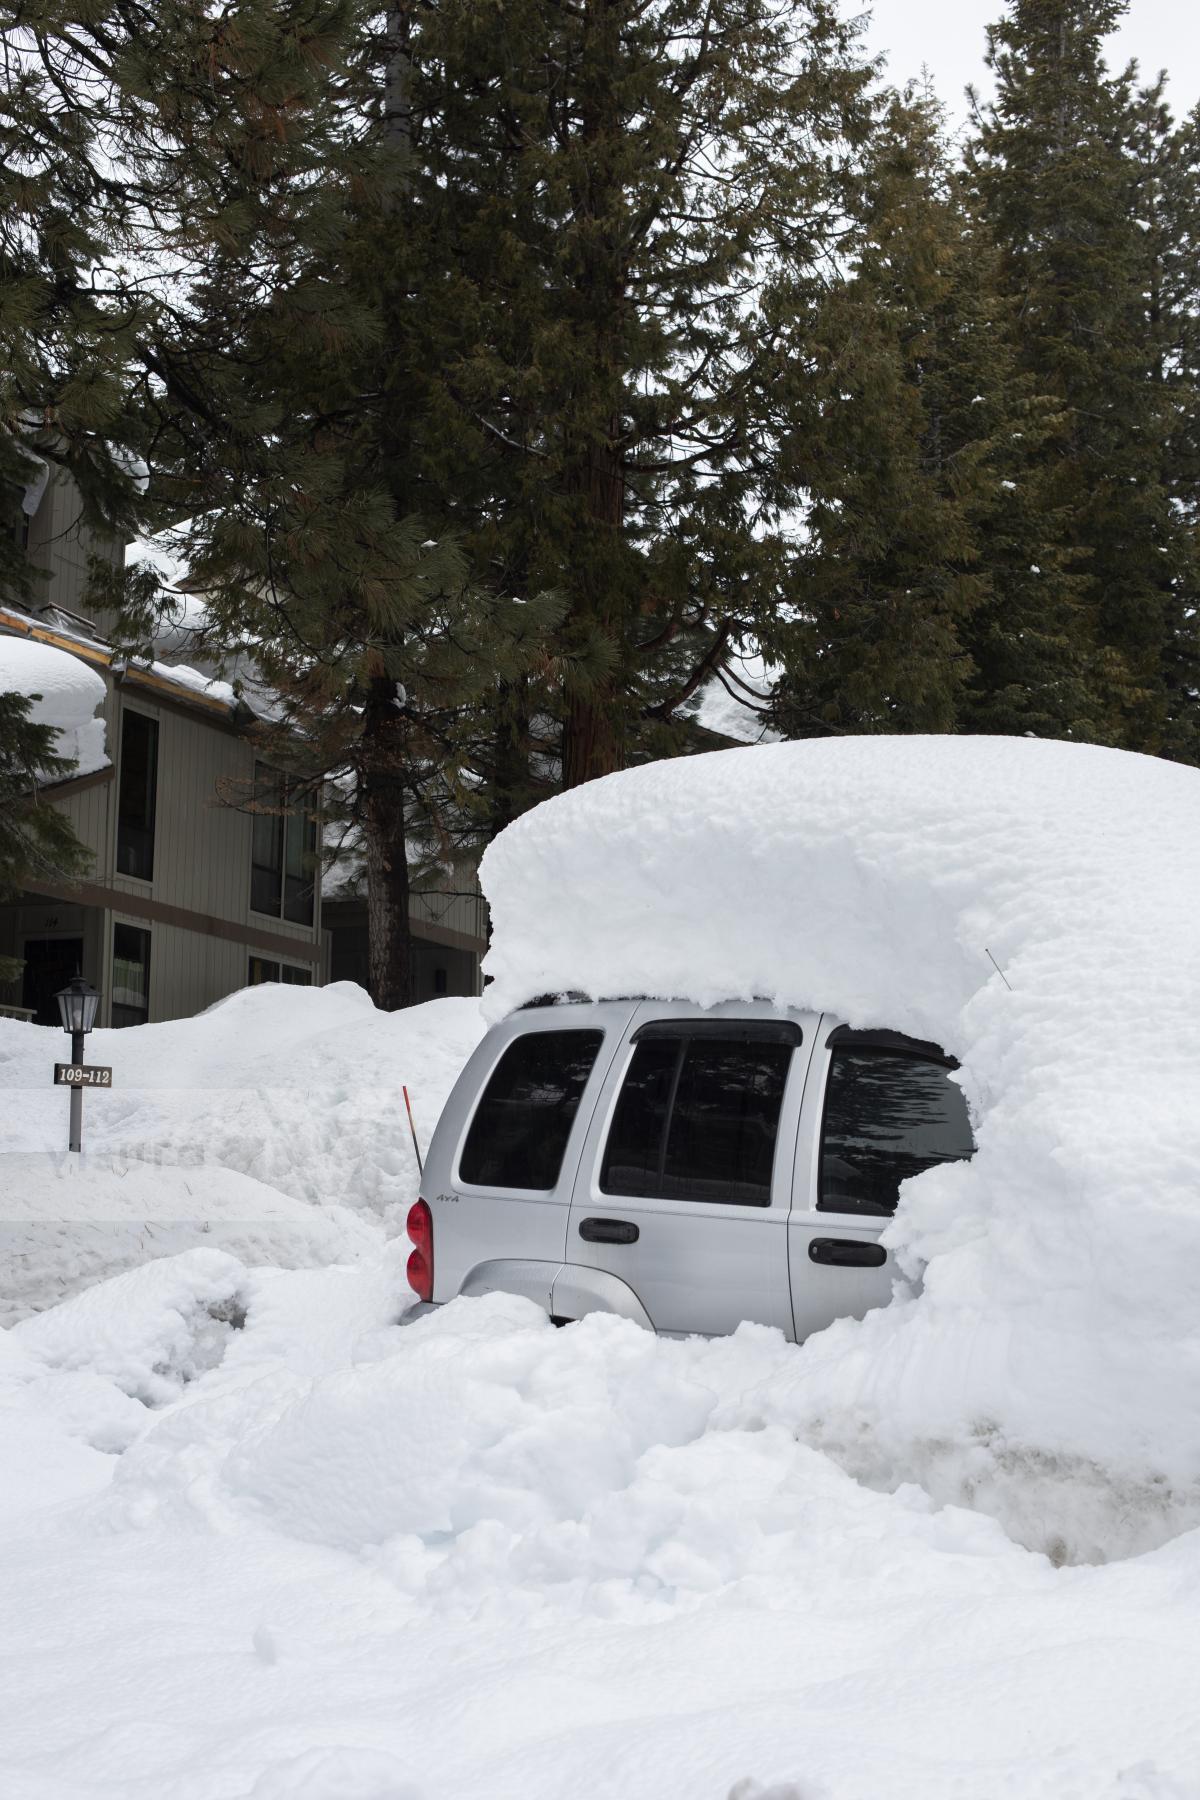 Purchase Car Covered in Snow in Lake Tahoe Region by Katie Linsky Shaw